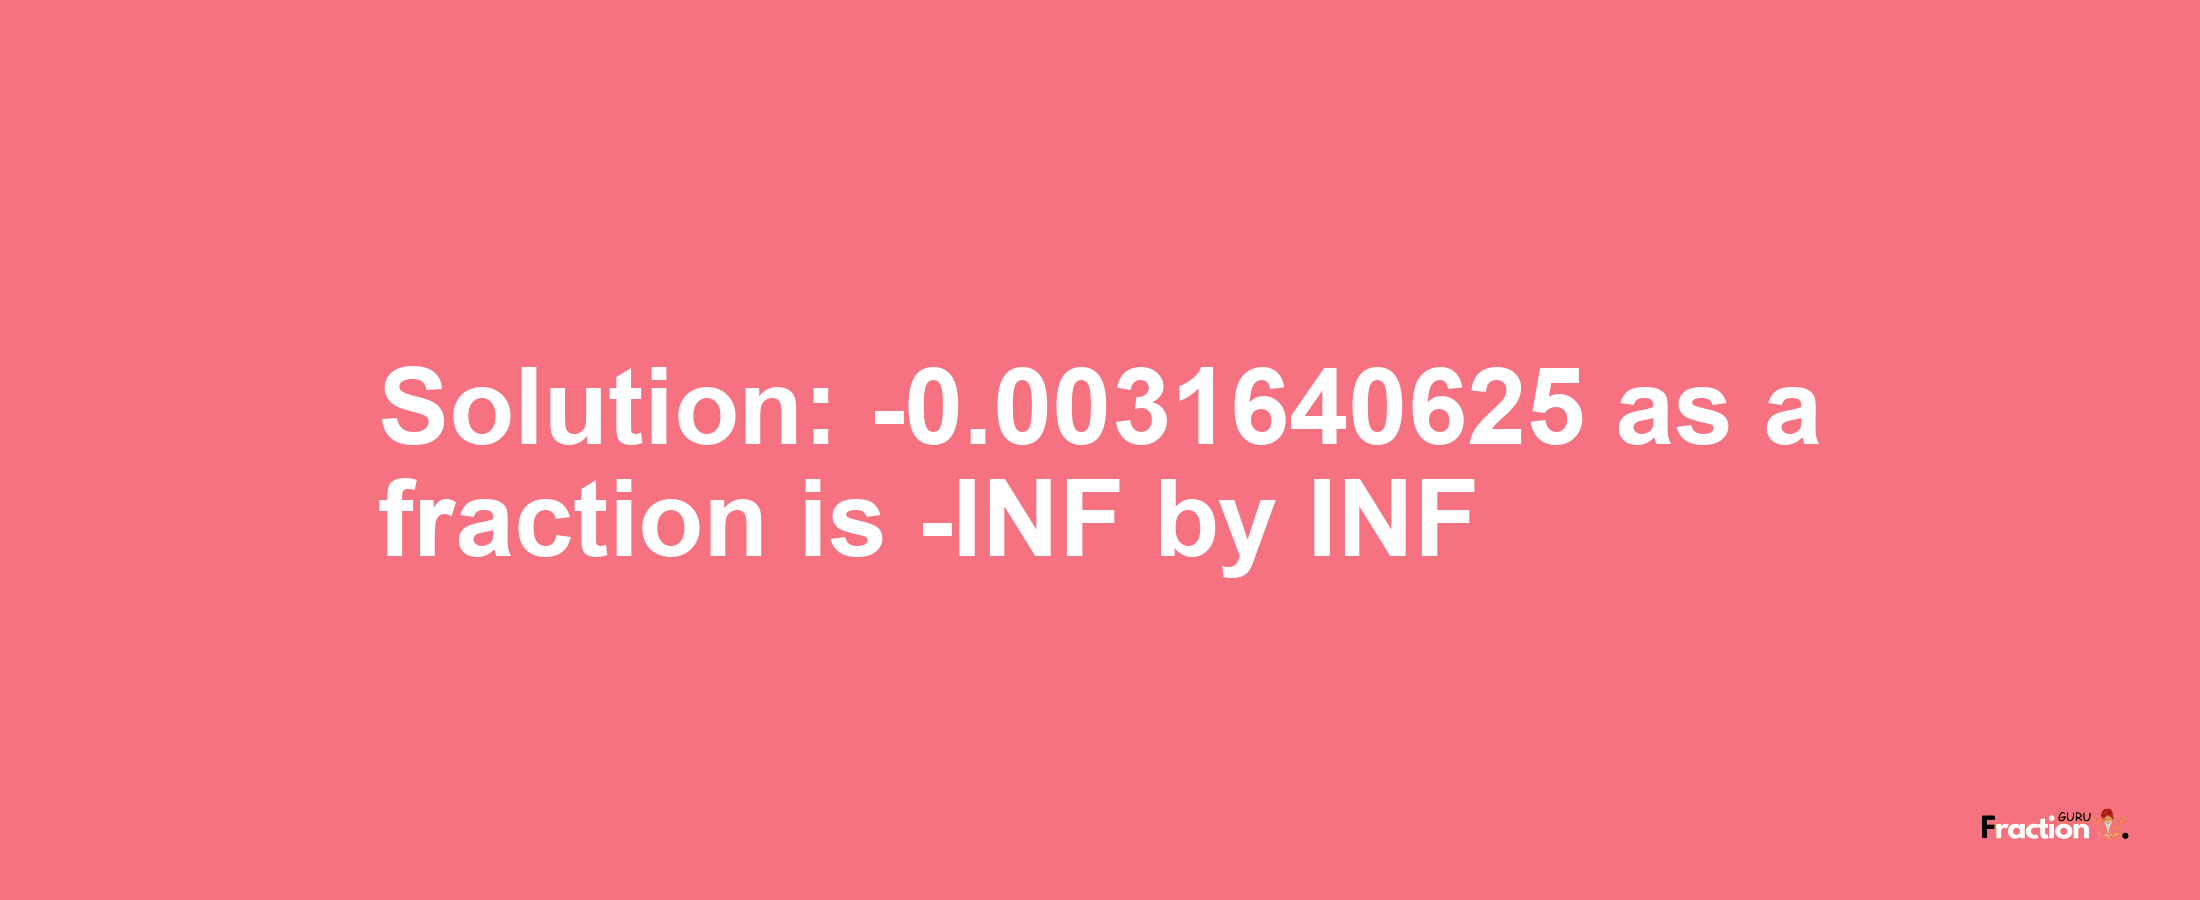 Solution:-0.0031640625 as a fraction is -INF/INF